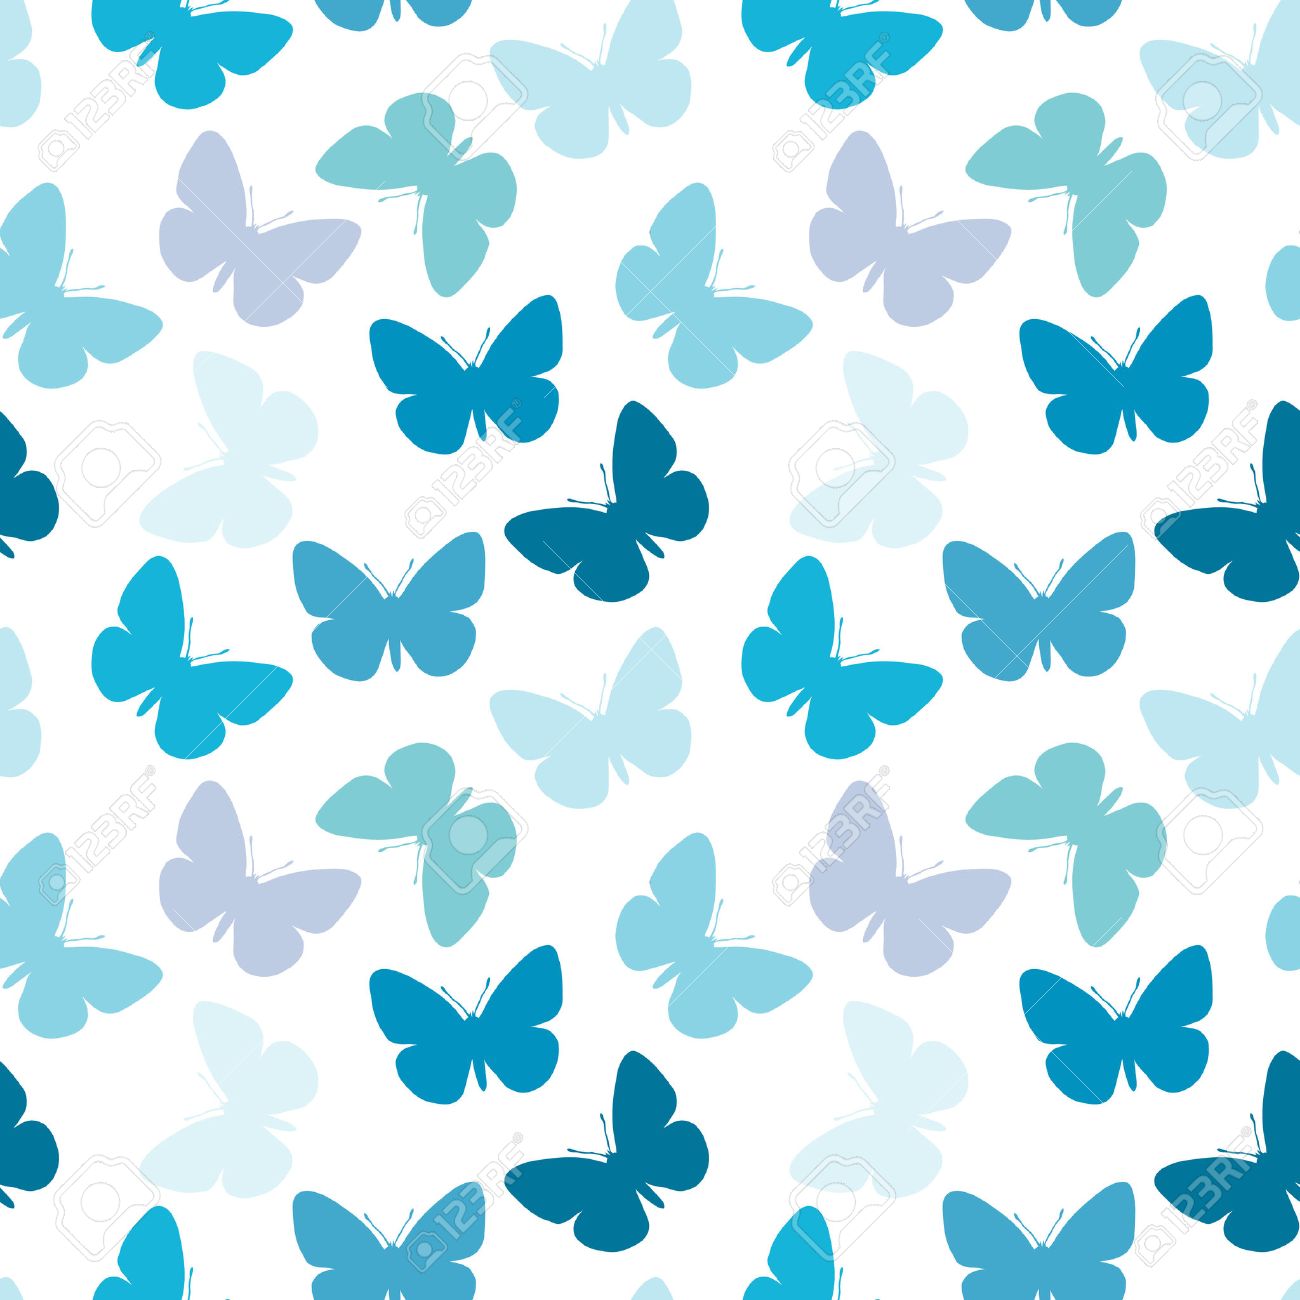 Free download Seamless Blue Butterfly Wallpaper Royalty Free SVG Cliparts  [1300x1300] for your Desktop, Mobile & Tablet | Explore 14+ Small Butterflies  Wallpapers | Butterflies Backgrounds, Free Wallpaper Butterflies, Wallpapers  Of Butterflies